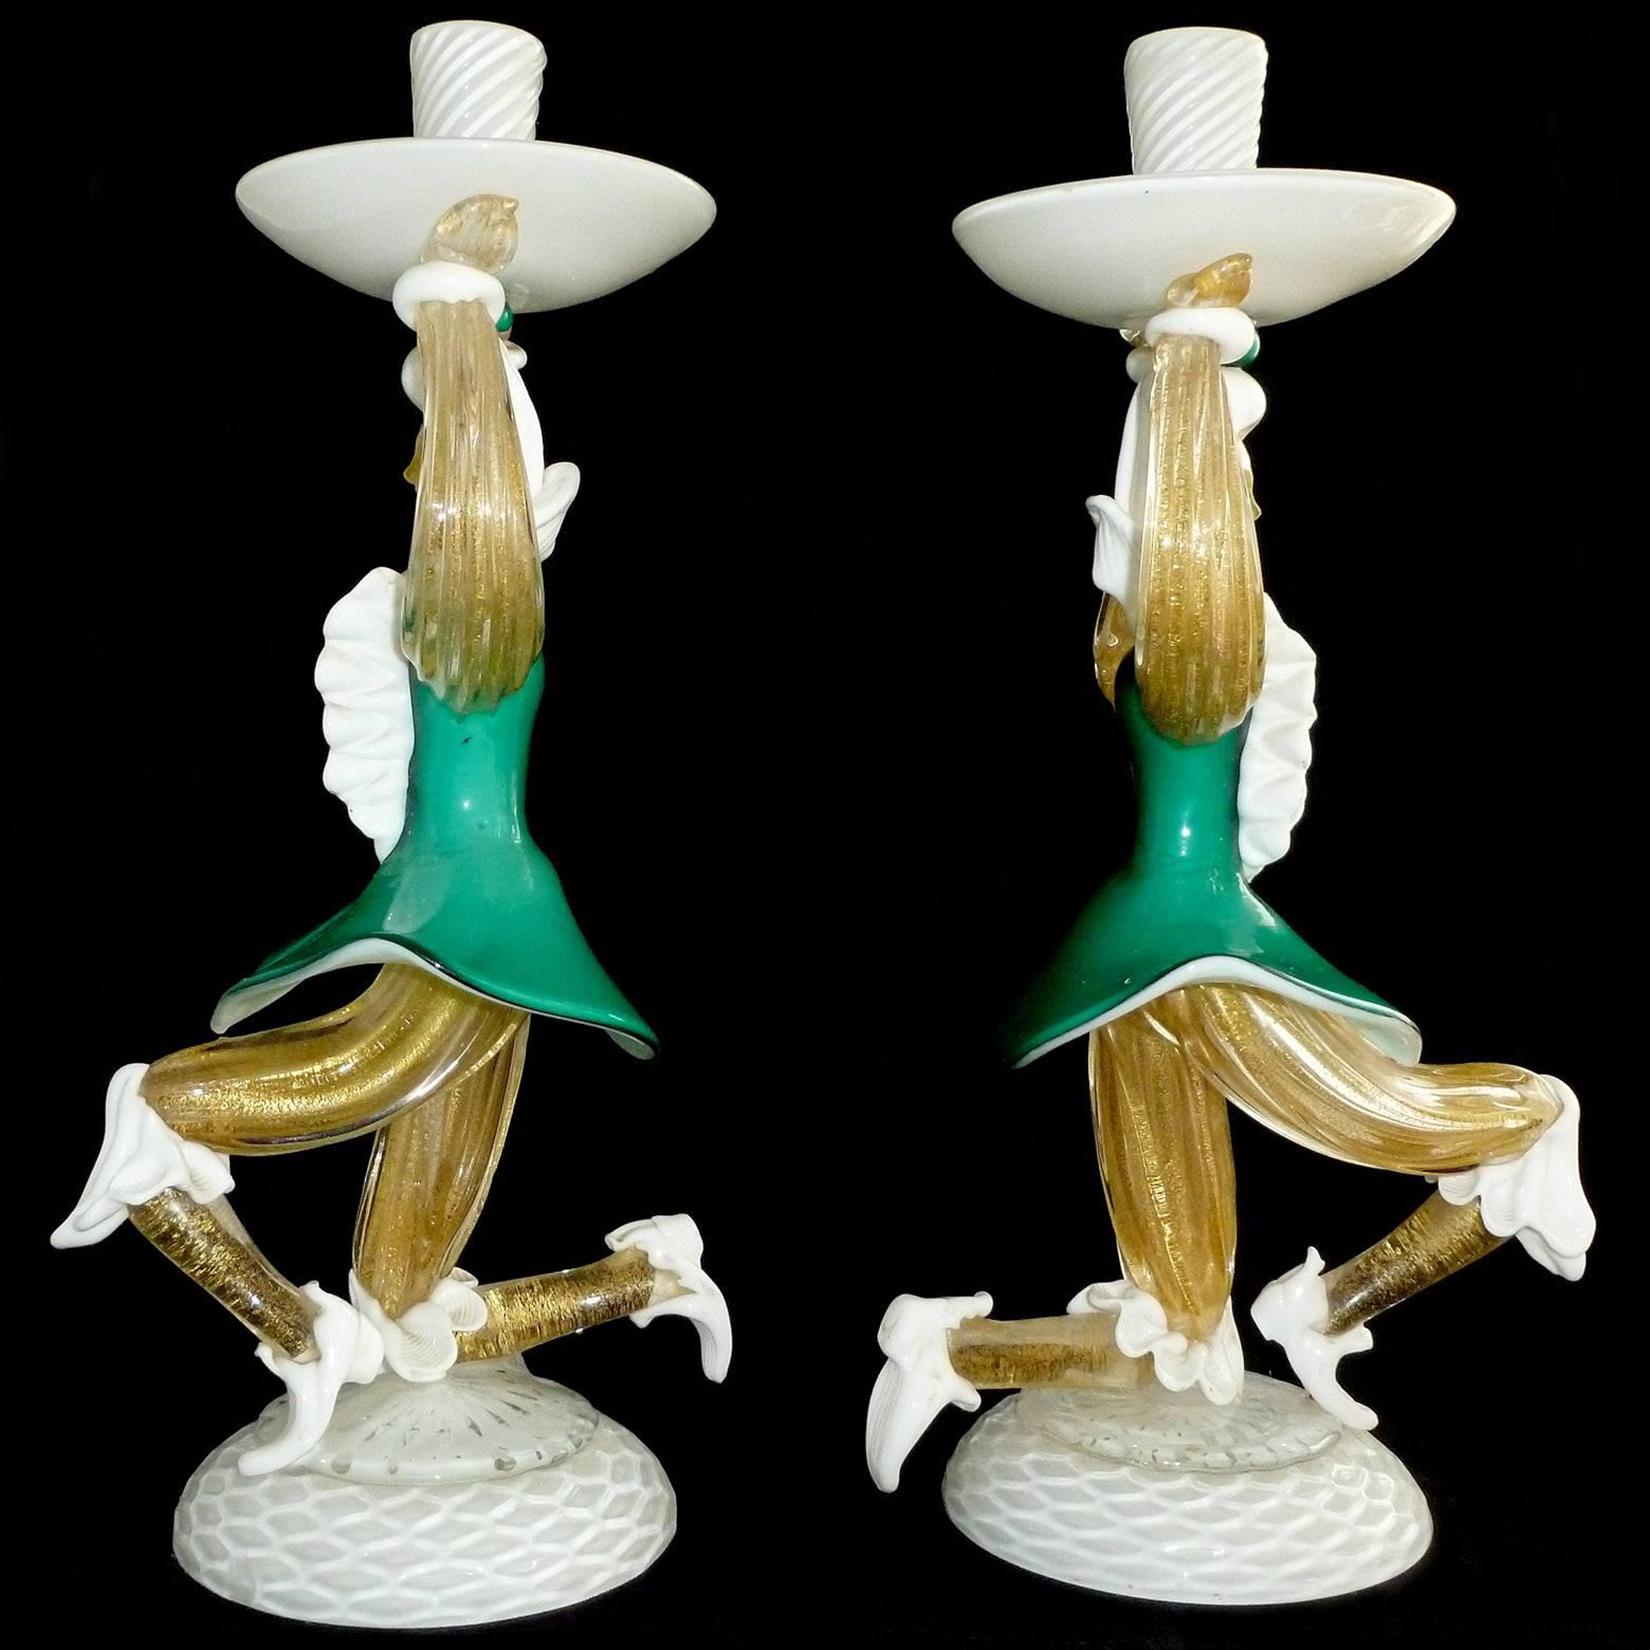 Beautiful pair of large vintage Murano hand blown white, gold flecks and teal green Italian art glass figural candlestick sculptures of Venetian gentleman. They are a true matched pair, and created in the manner of the Barovier & Toso company. Both